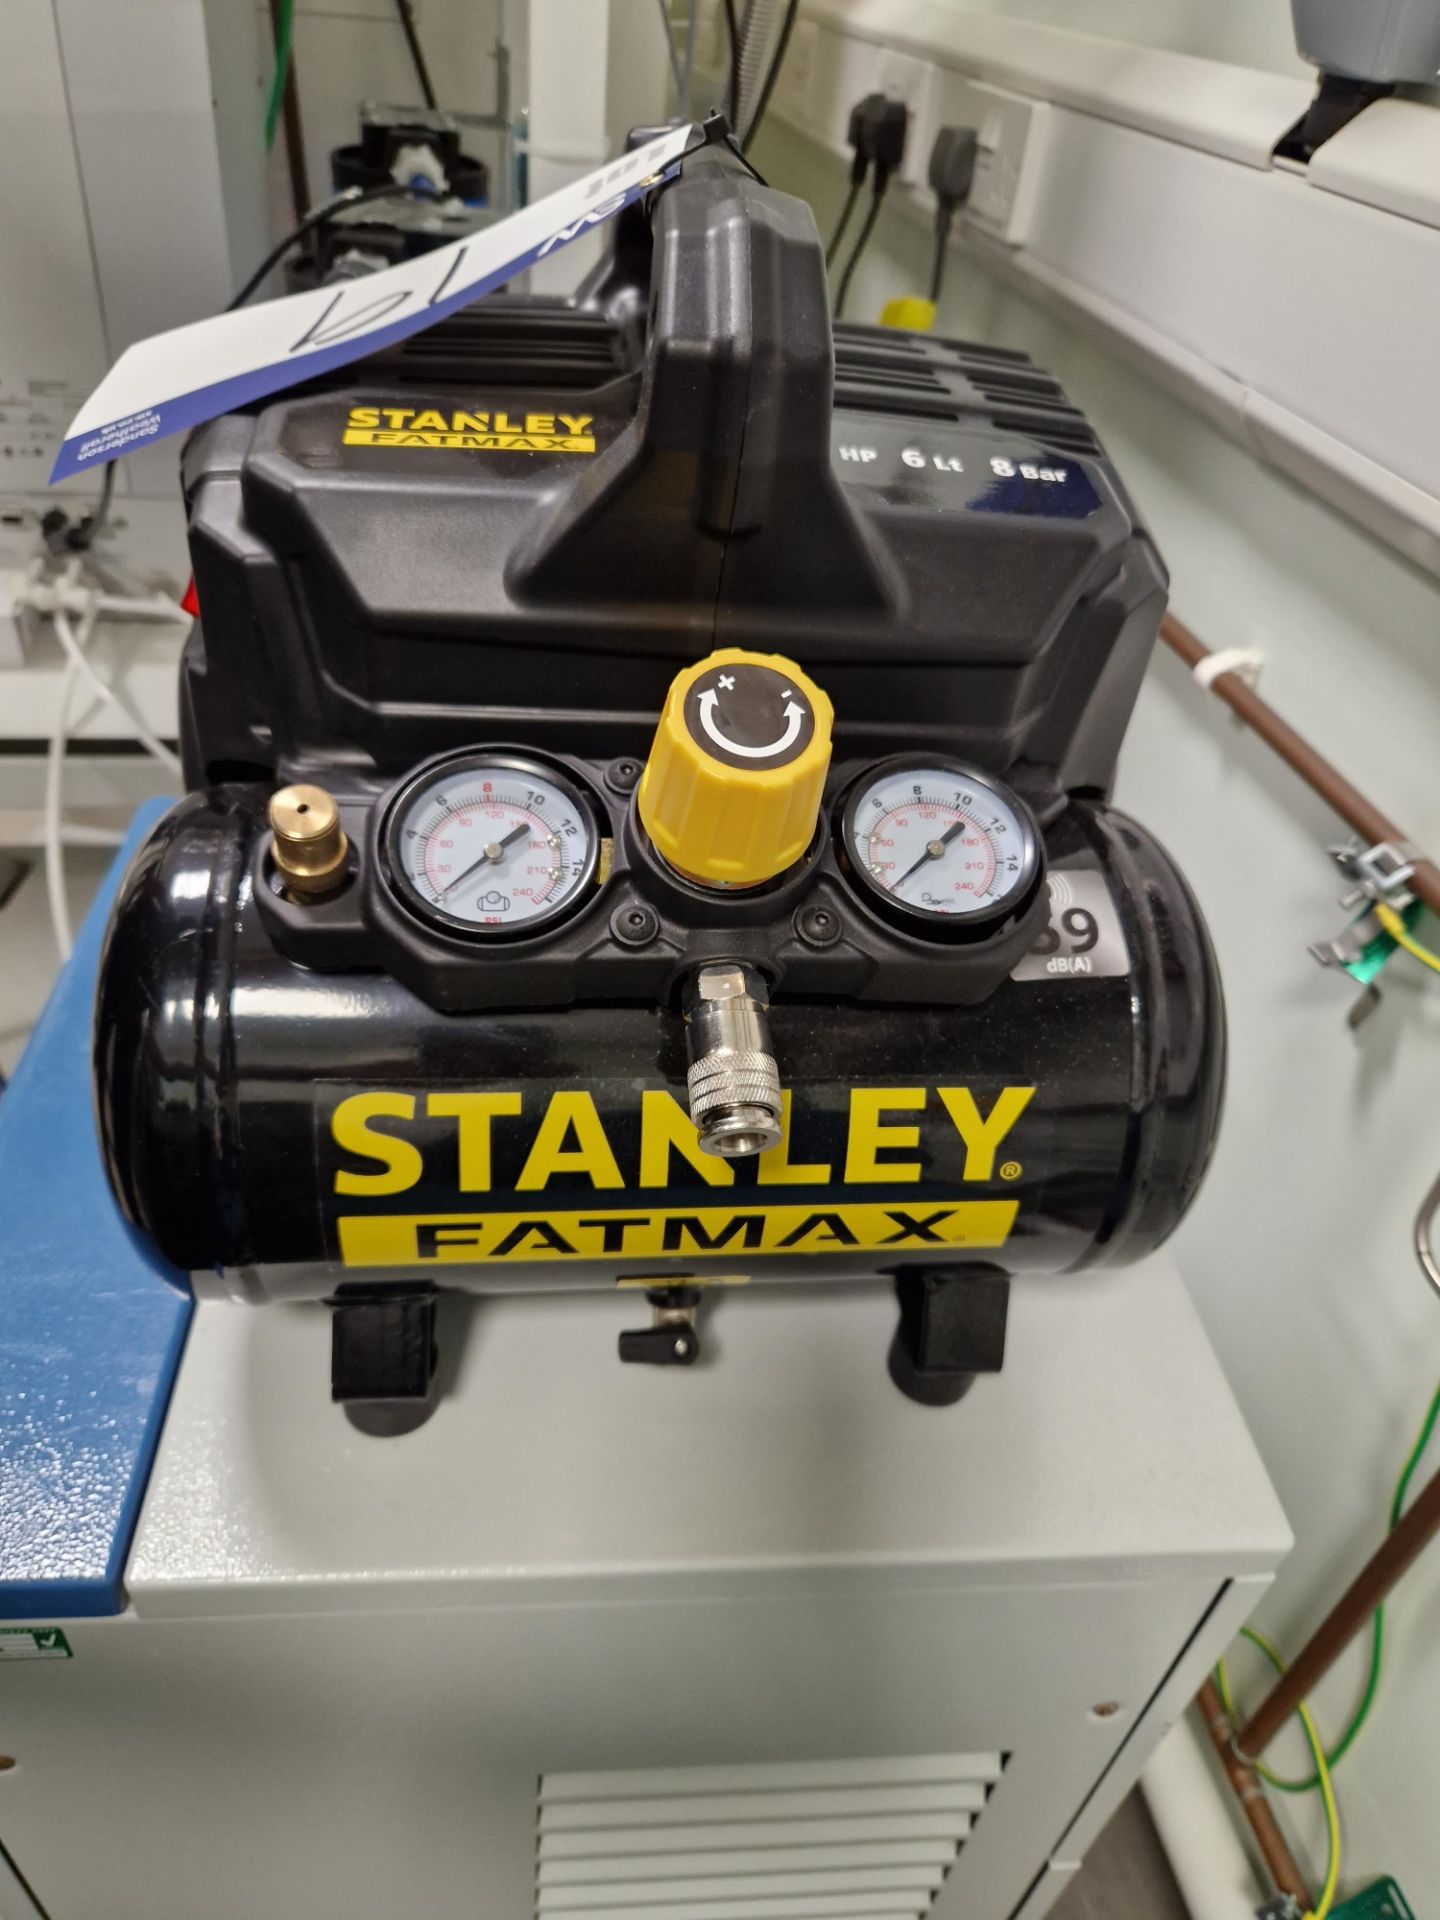 Stanley Fatmax DST101/8/8 1.0HP 6 Litre 8Bar Air Compressor, Serial No. 2069260010 (2021) Please - Image 2 of 3